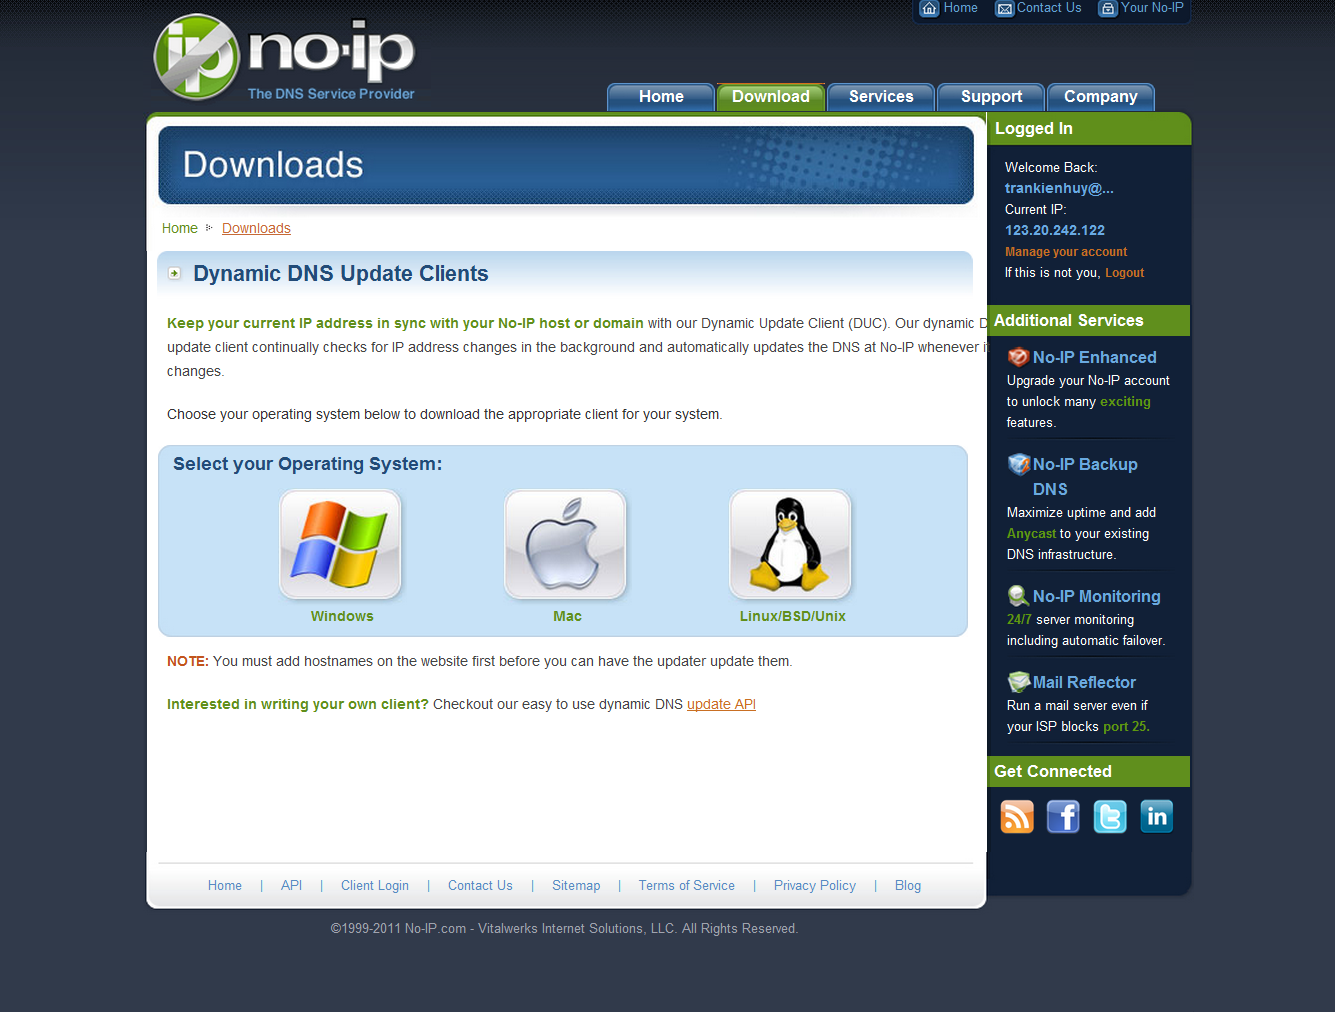 Noip com. No-IP. Additional services. Chack org.